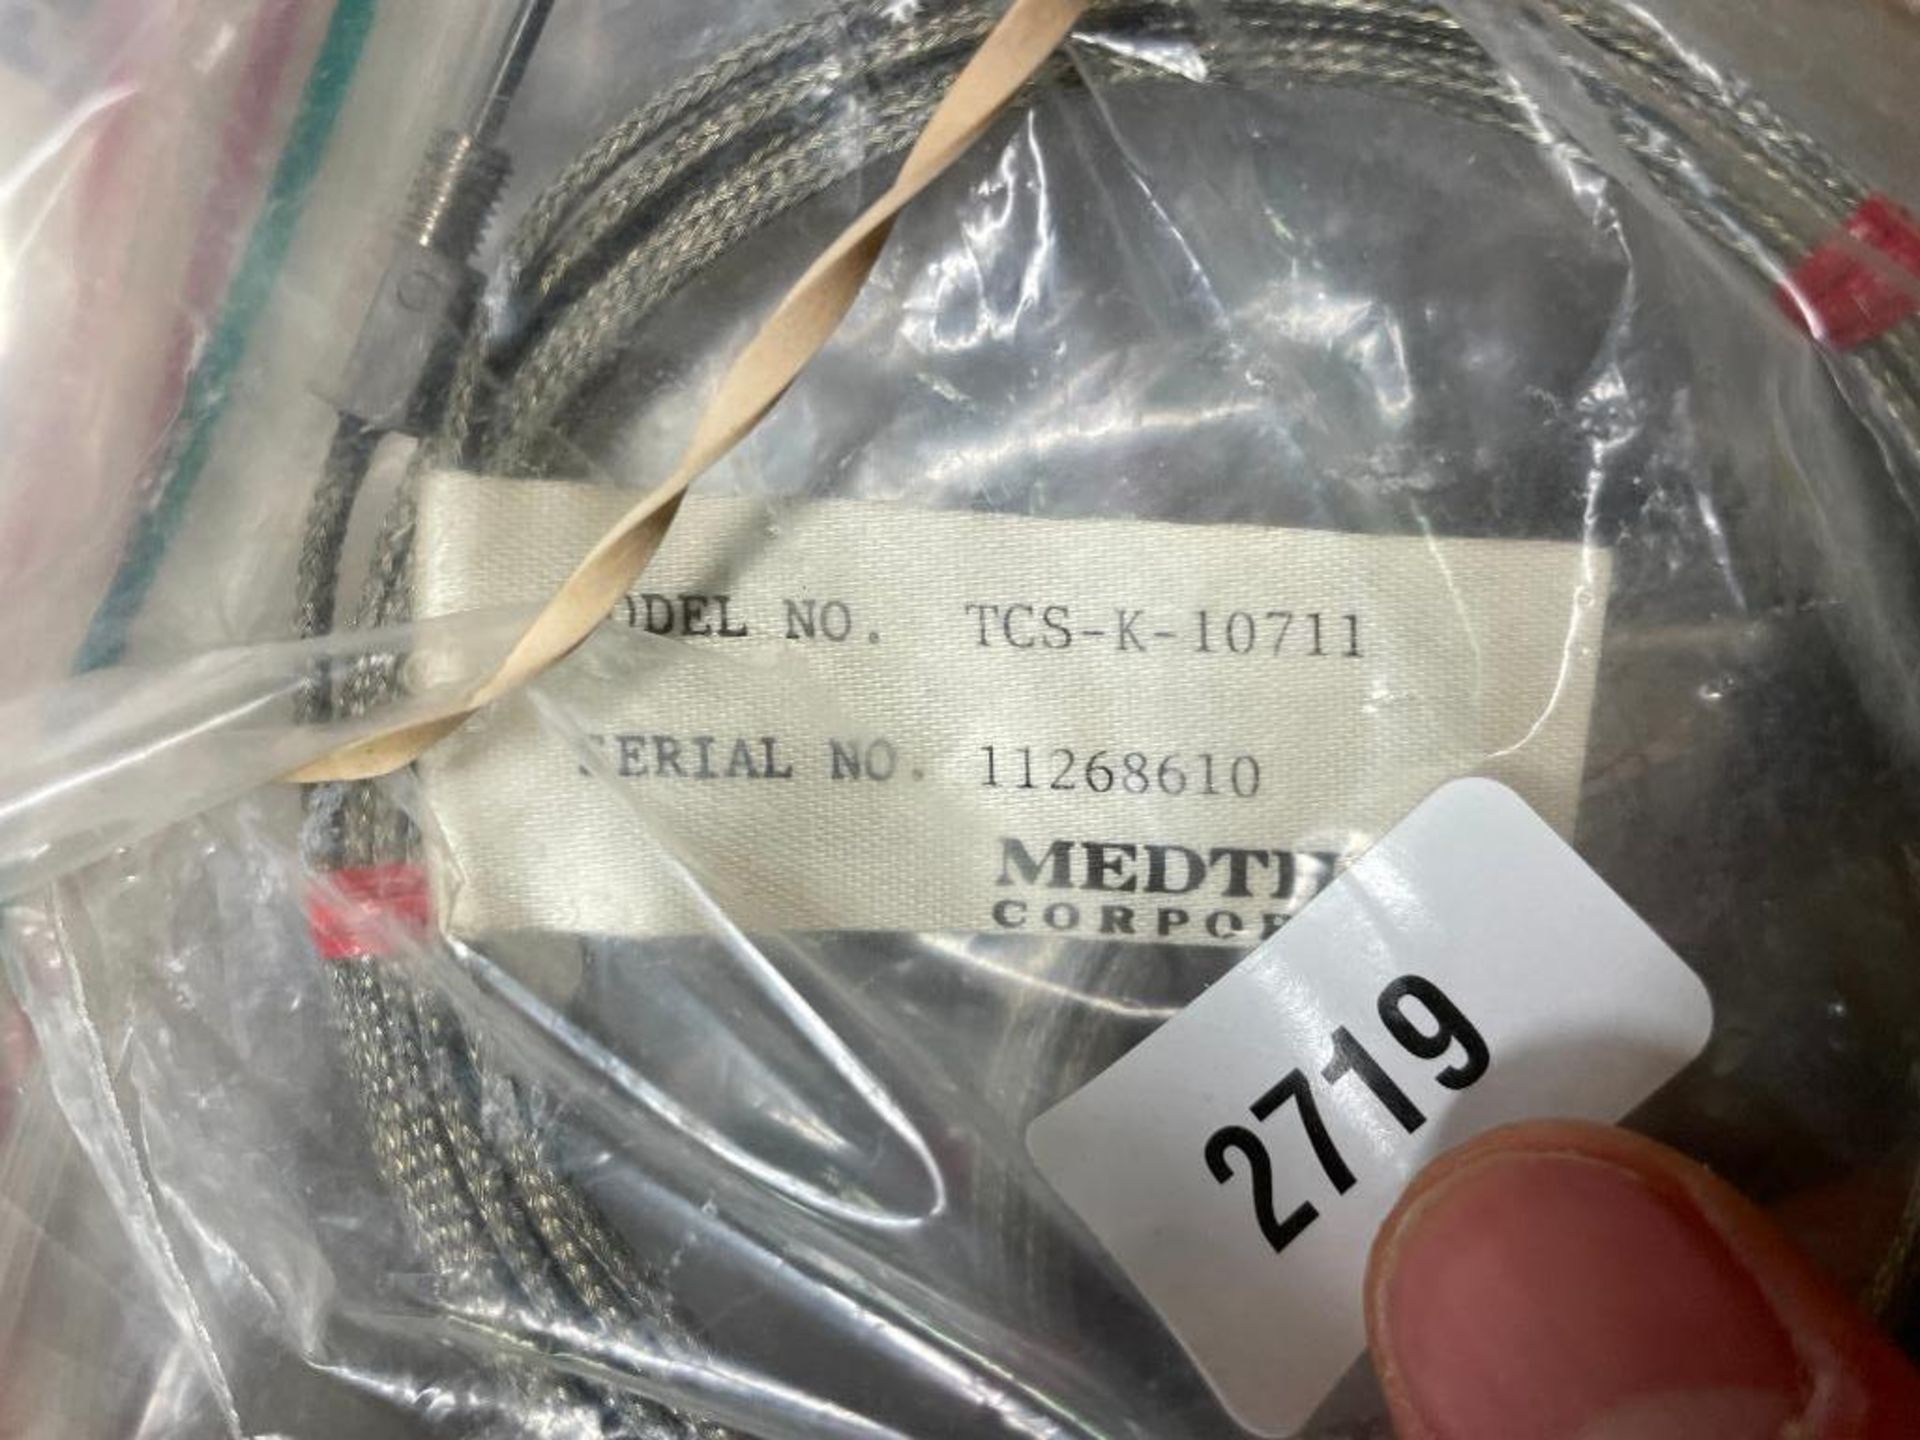 2-OMEGA COPPER/CONSTANTIN AND 5-MEDTERM WIRE THERMOCOUPLES QTY: 1 - Image 2 of 4